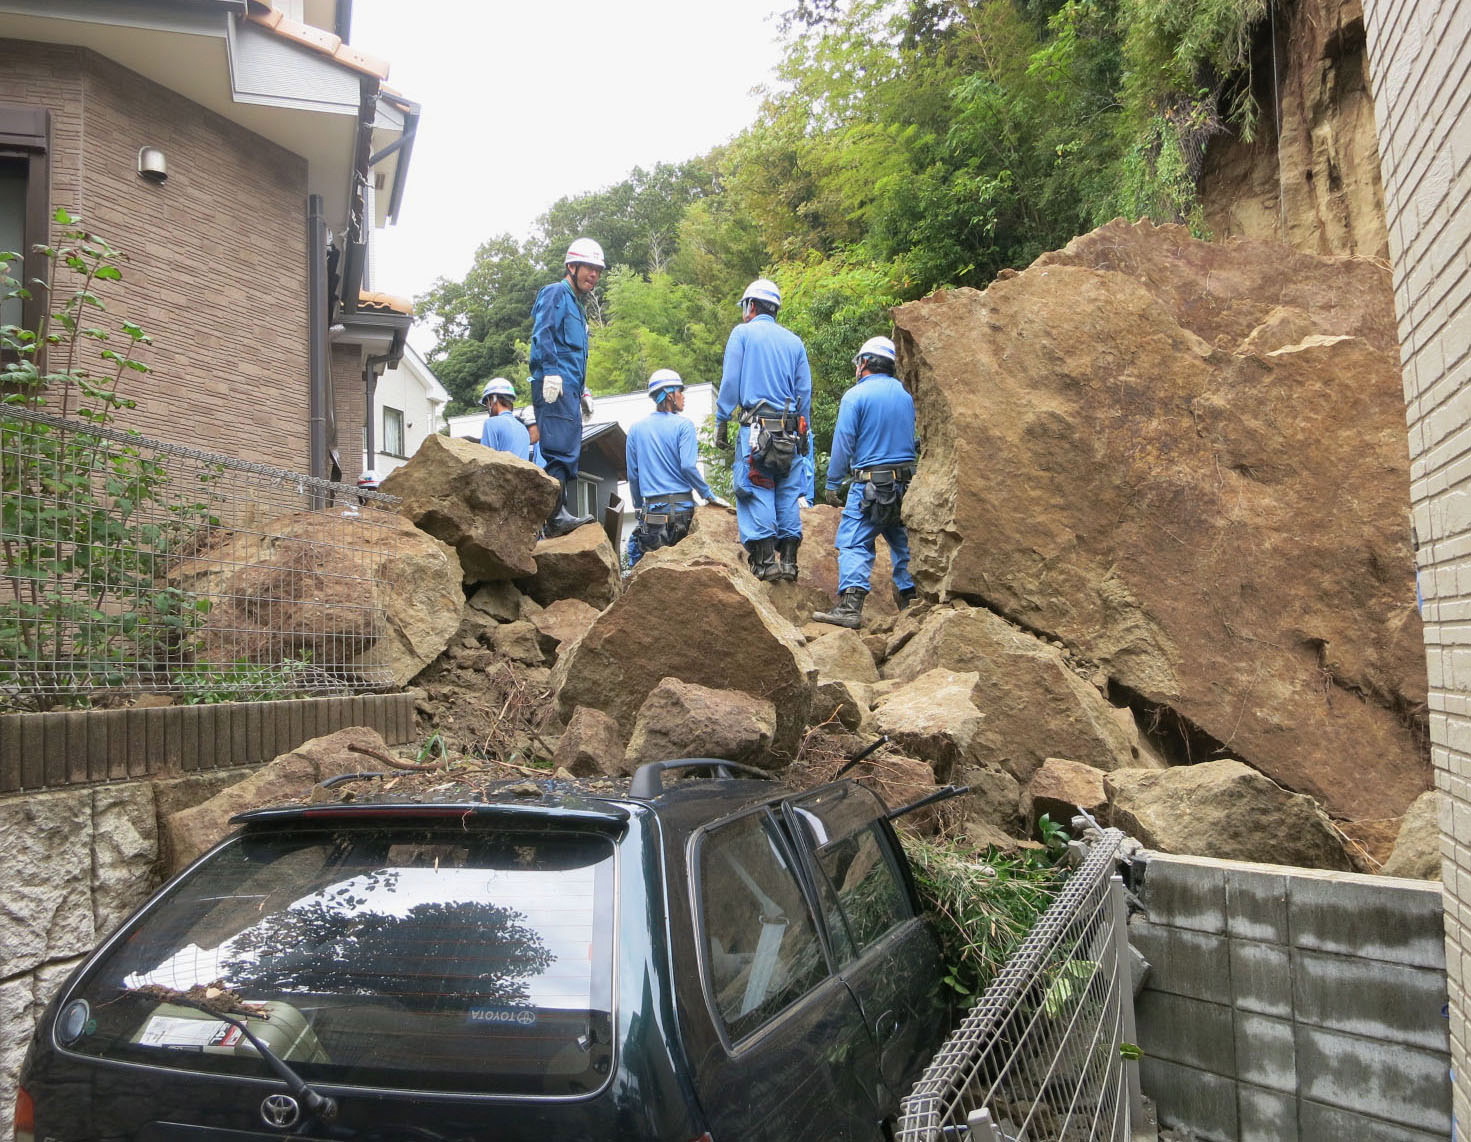 Firefighters stand on rocks fallen from a cliff over a garage and a road in a residential area in Kamakura, southwest of Tokyo, after a powerful typhoon hit Japan's metropolitan area Wednesday morning.